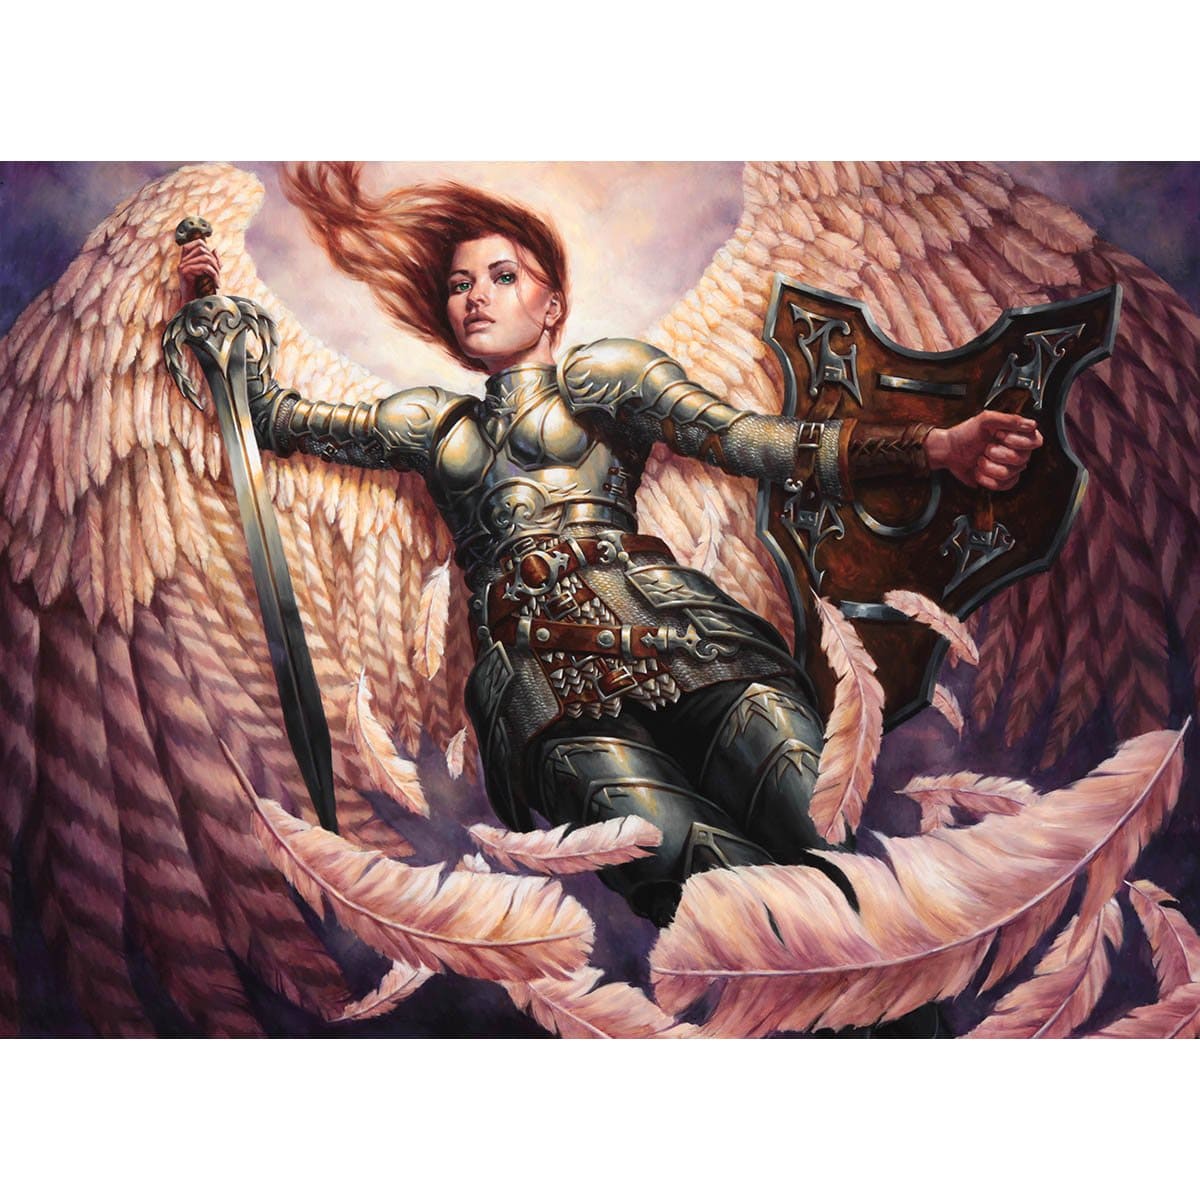 Angelic Accord Print - Print - Original Magic Art - Accessories for Magic the Gathering and other card games